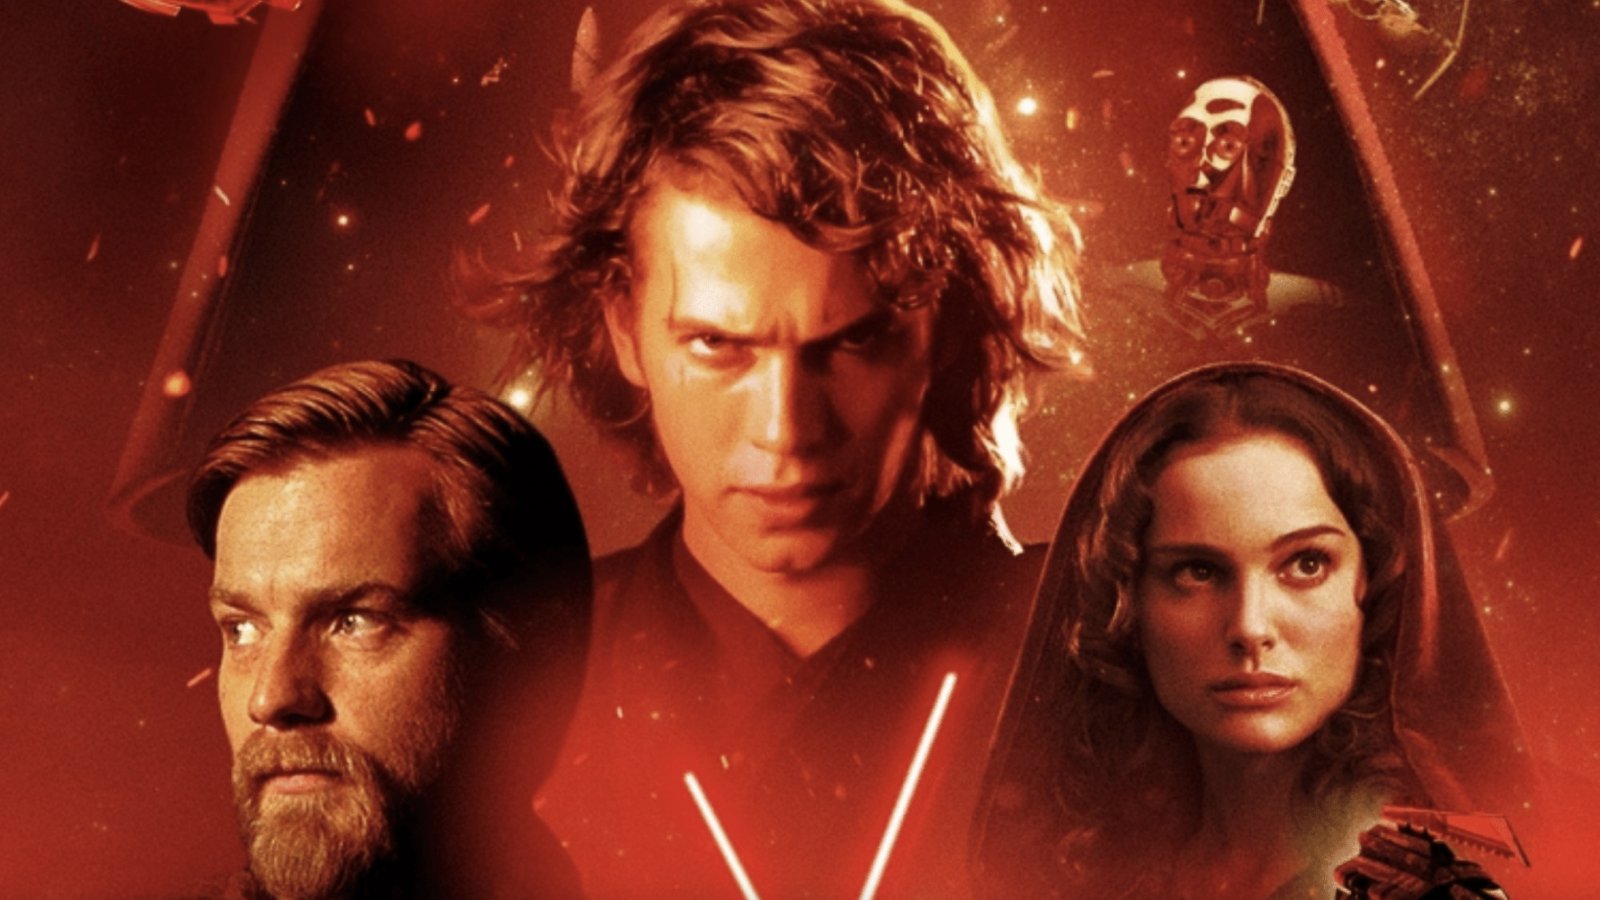 Star Wars: George Lucas asked three different directors to make prequels, so they refused